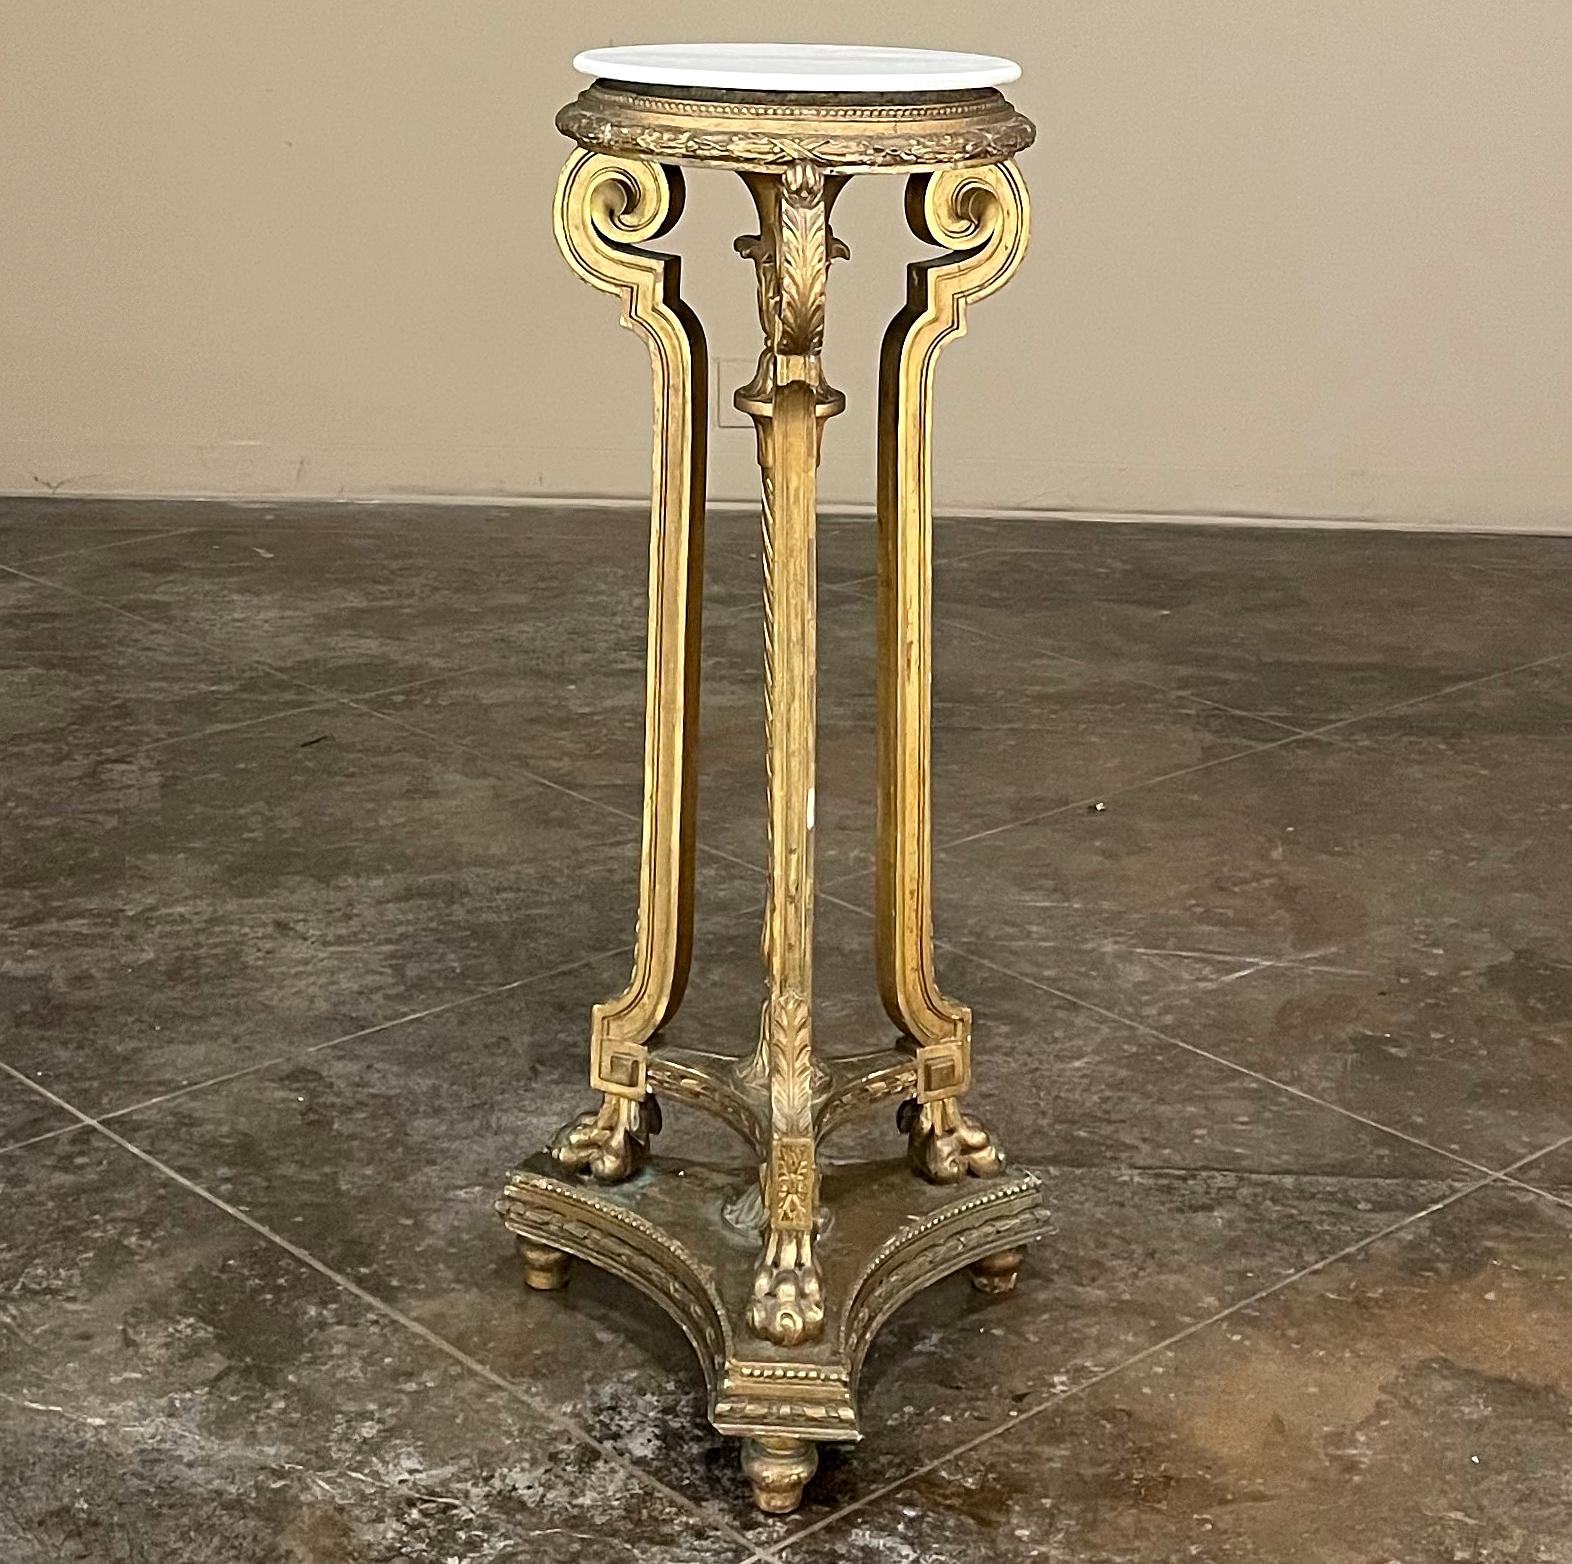 19th Century French Louis XVI giltwood pedestal with carrara marble top is the perfect display vehicle to show off your statuary, vase or objet d'art! Neoclassical styling pervades the design, which it topped by white Carrara marble with subtle